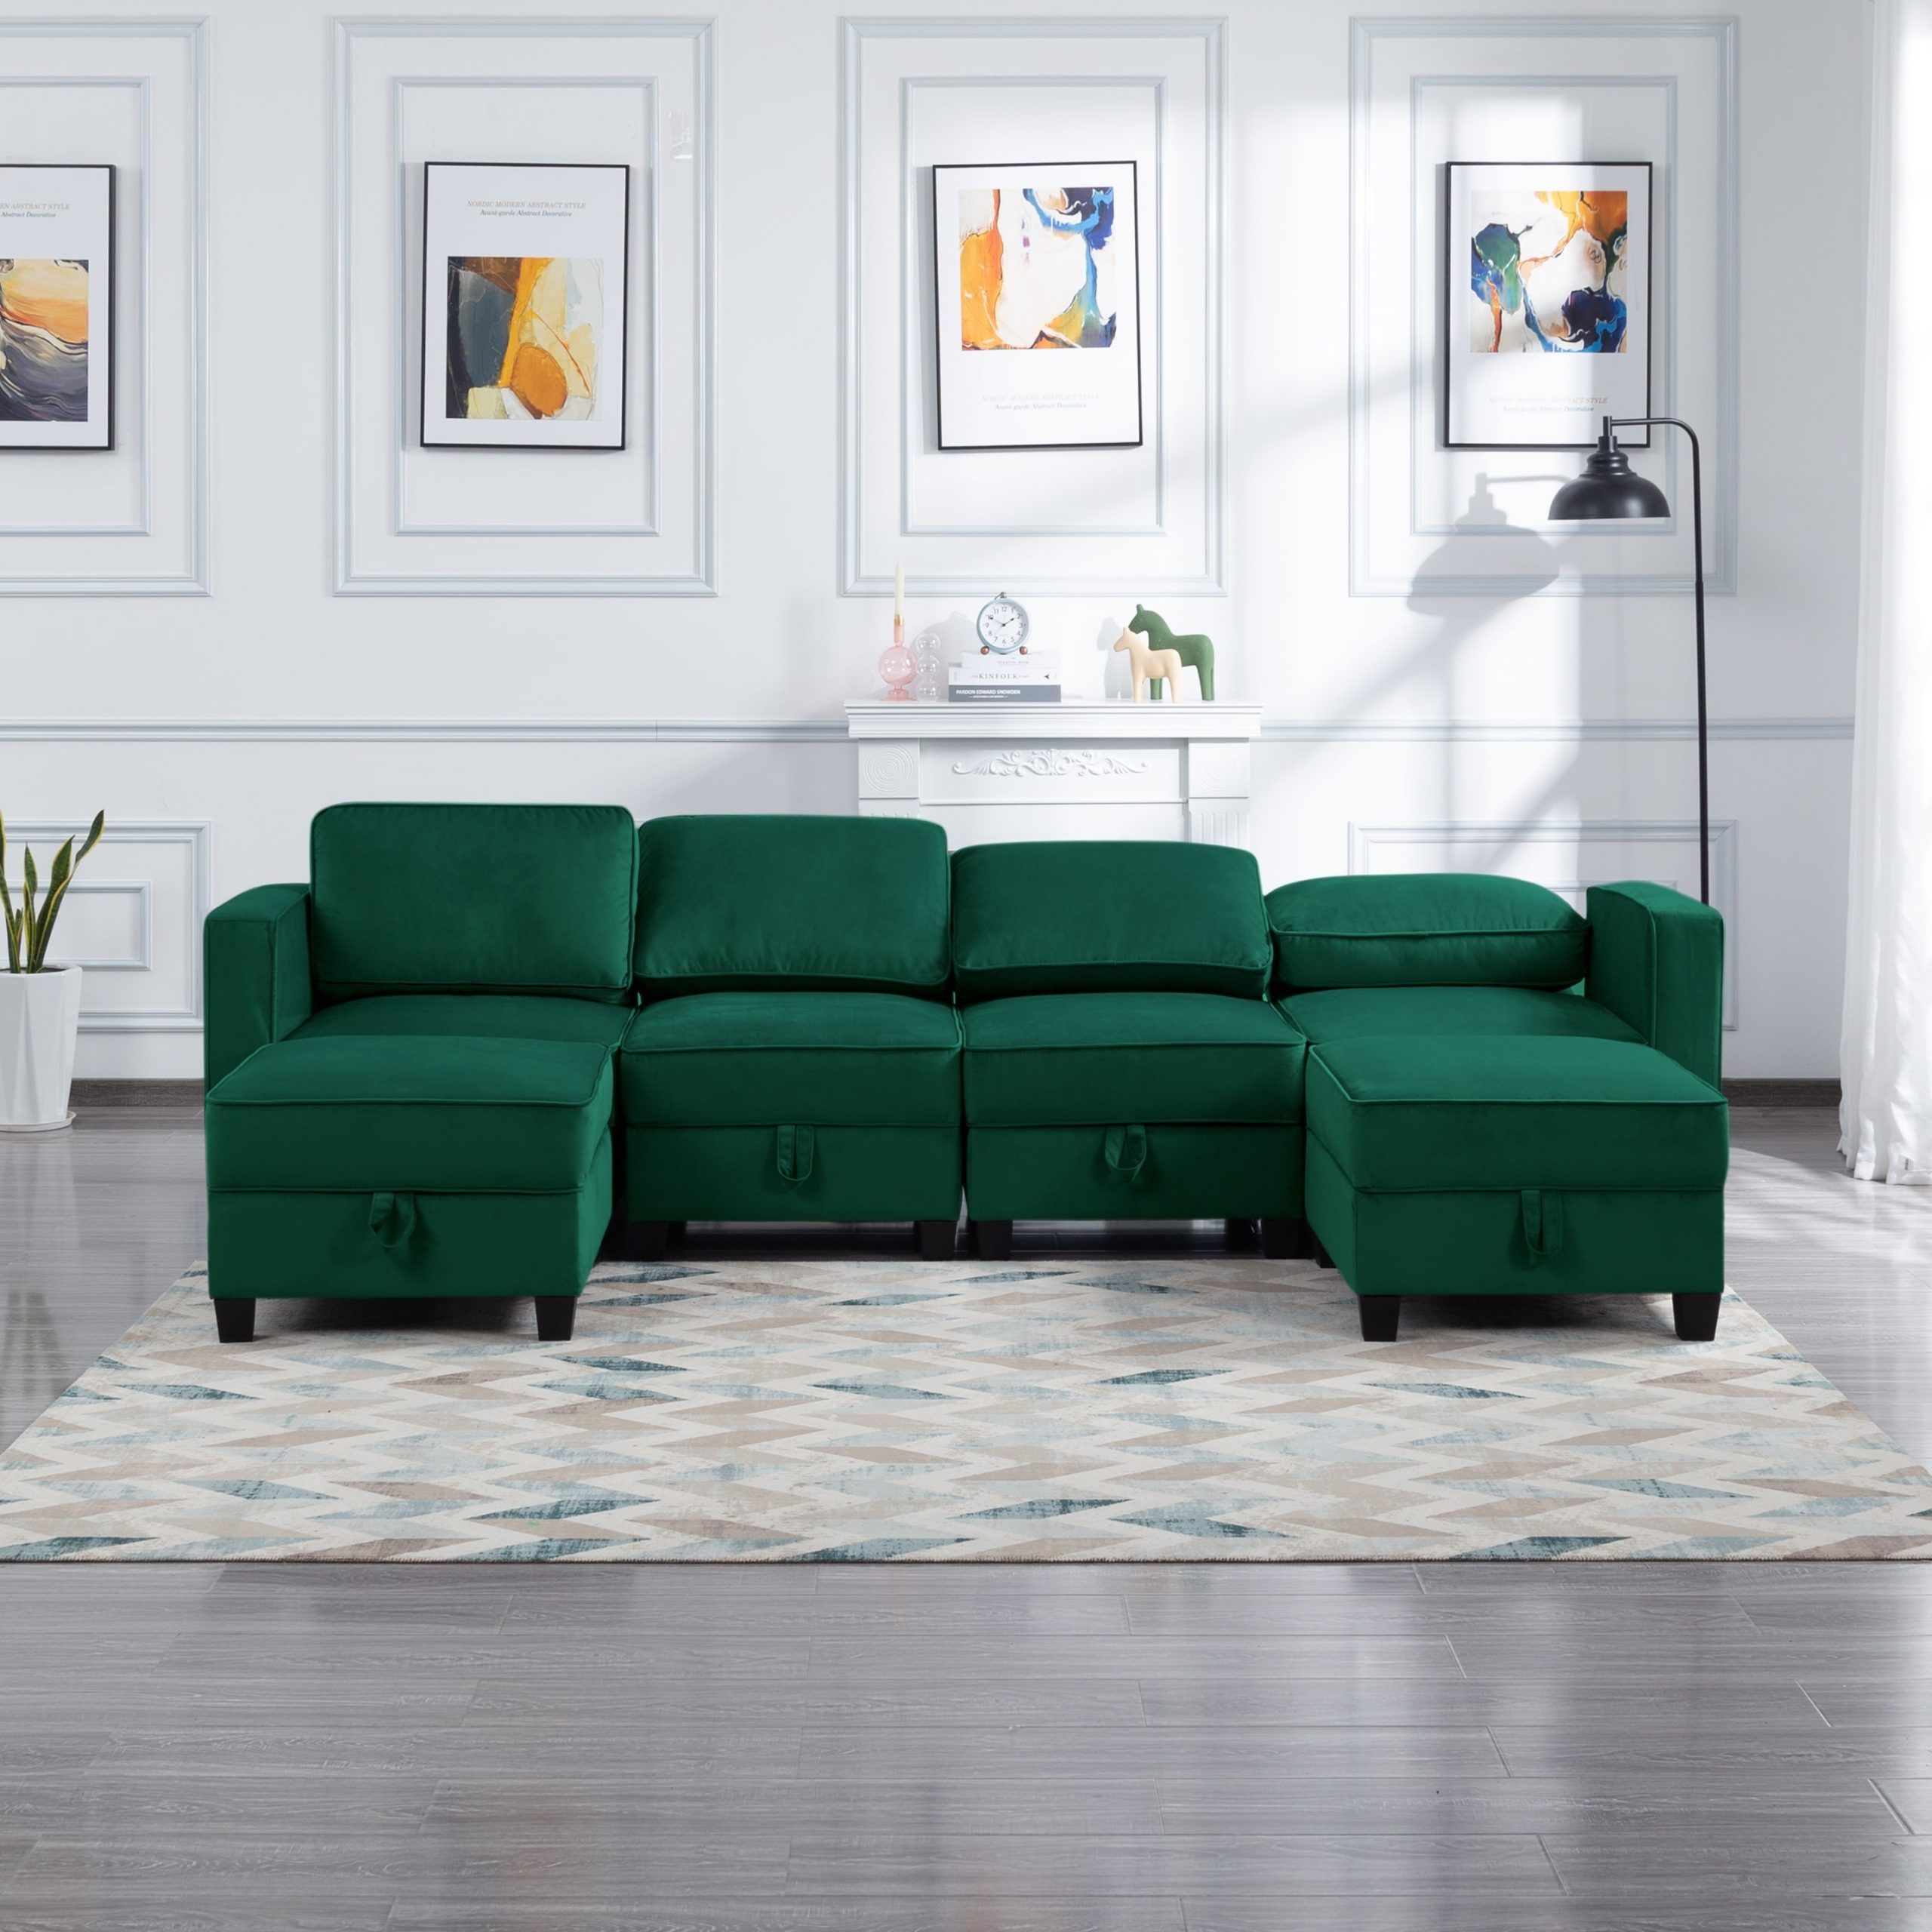 Green 116" Velvet Modular Sectional Sofa With Hidden Storage And Ottoman –  Bed Bath & Beyond – 39090598 For Green Velvet Modular Sectionals (View 8 of 15)